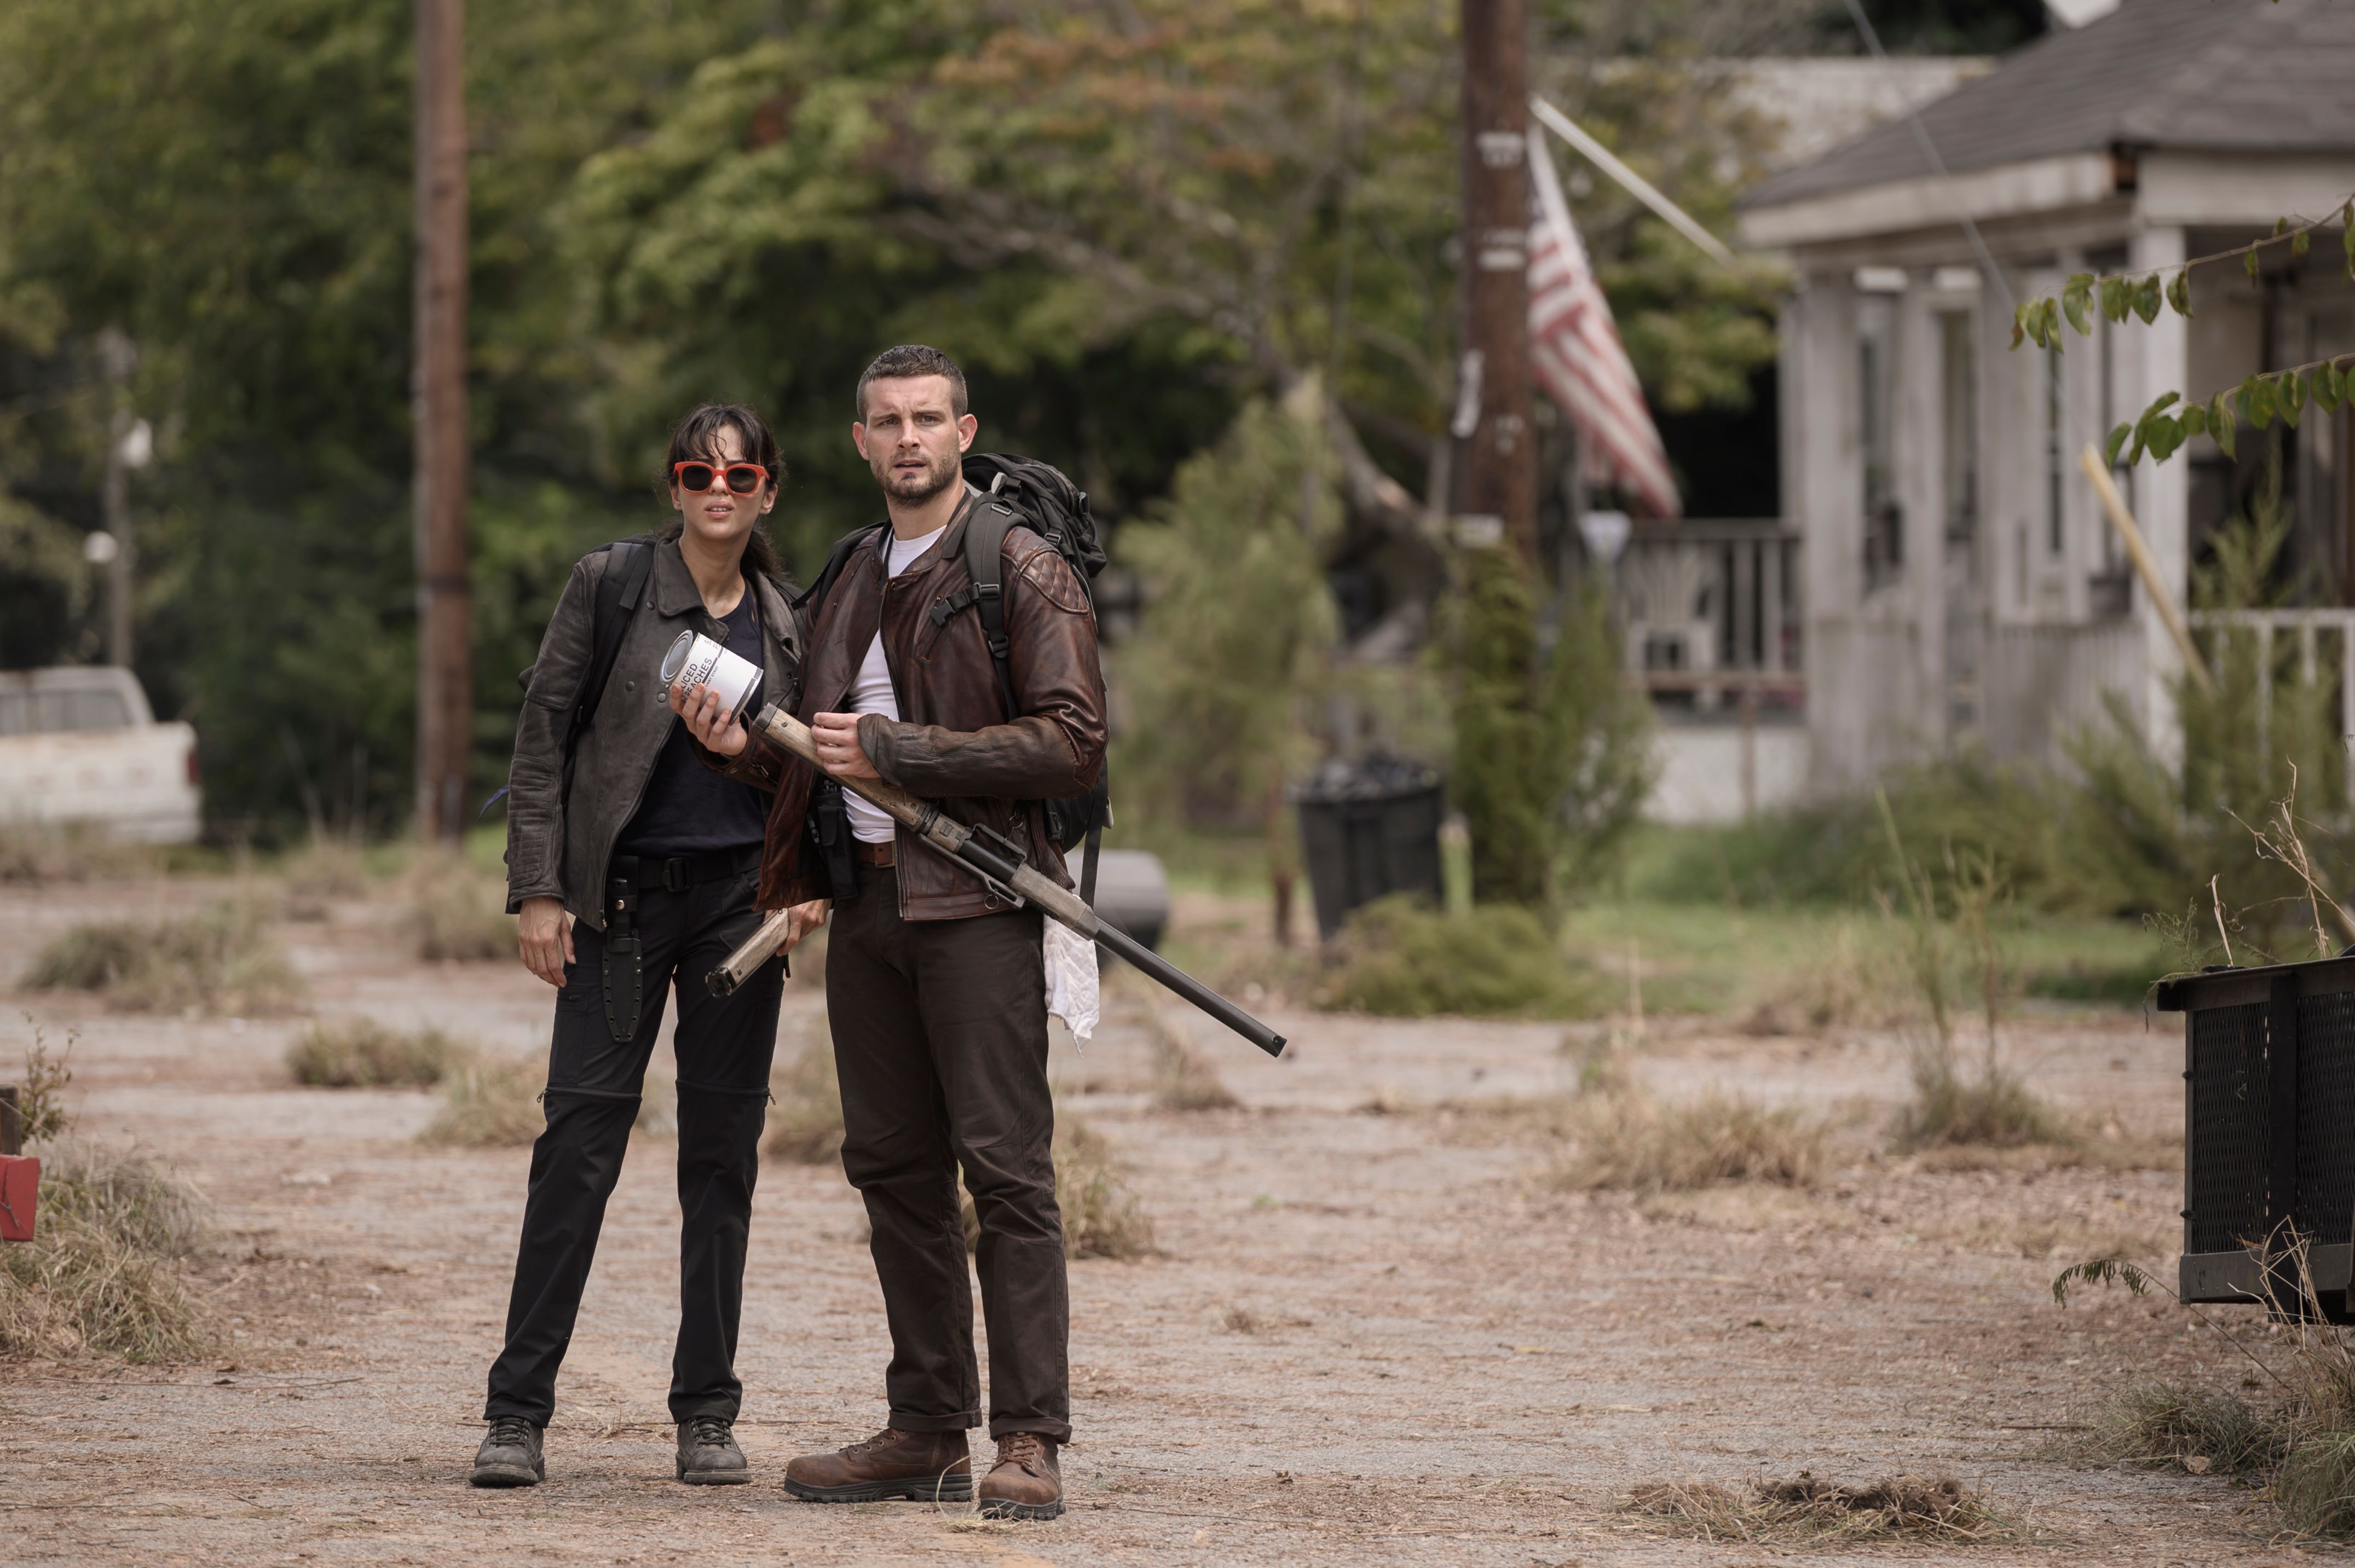 New Walking Dead Series Cast Revealed in New Images from AMC | Collider